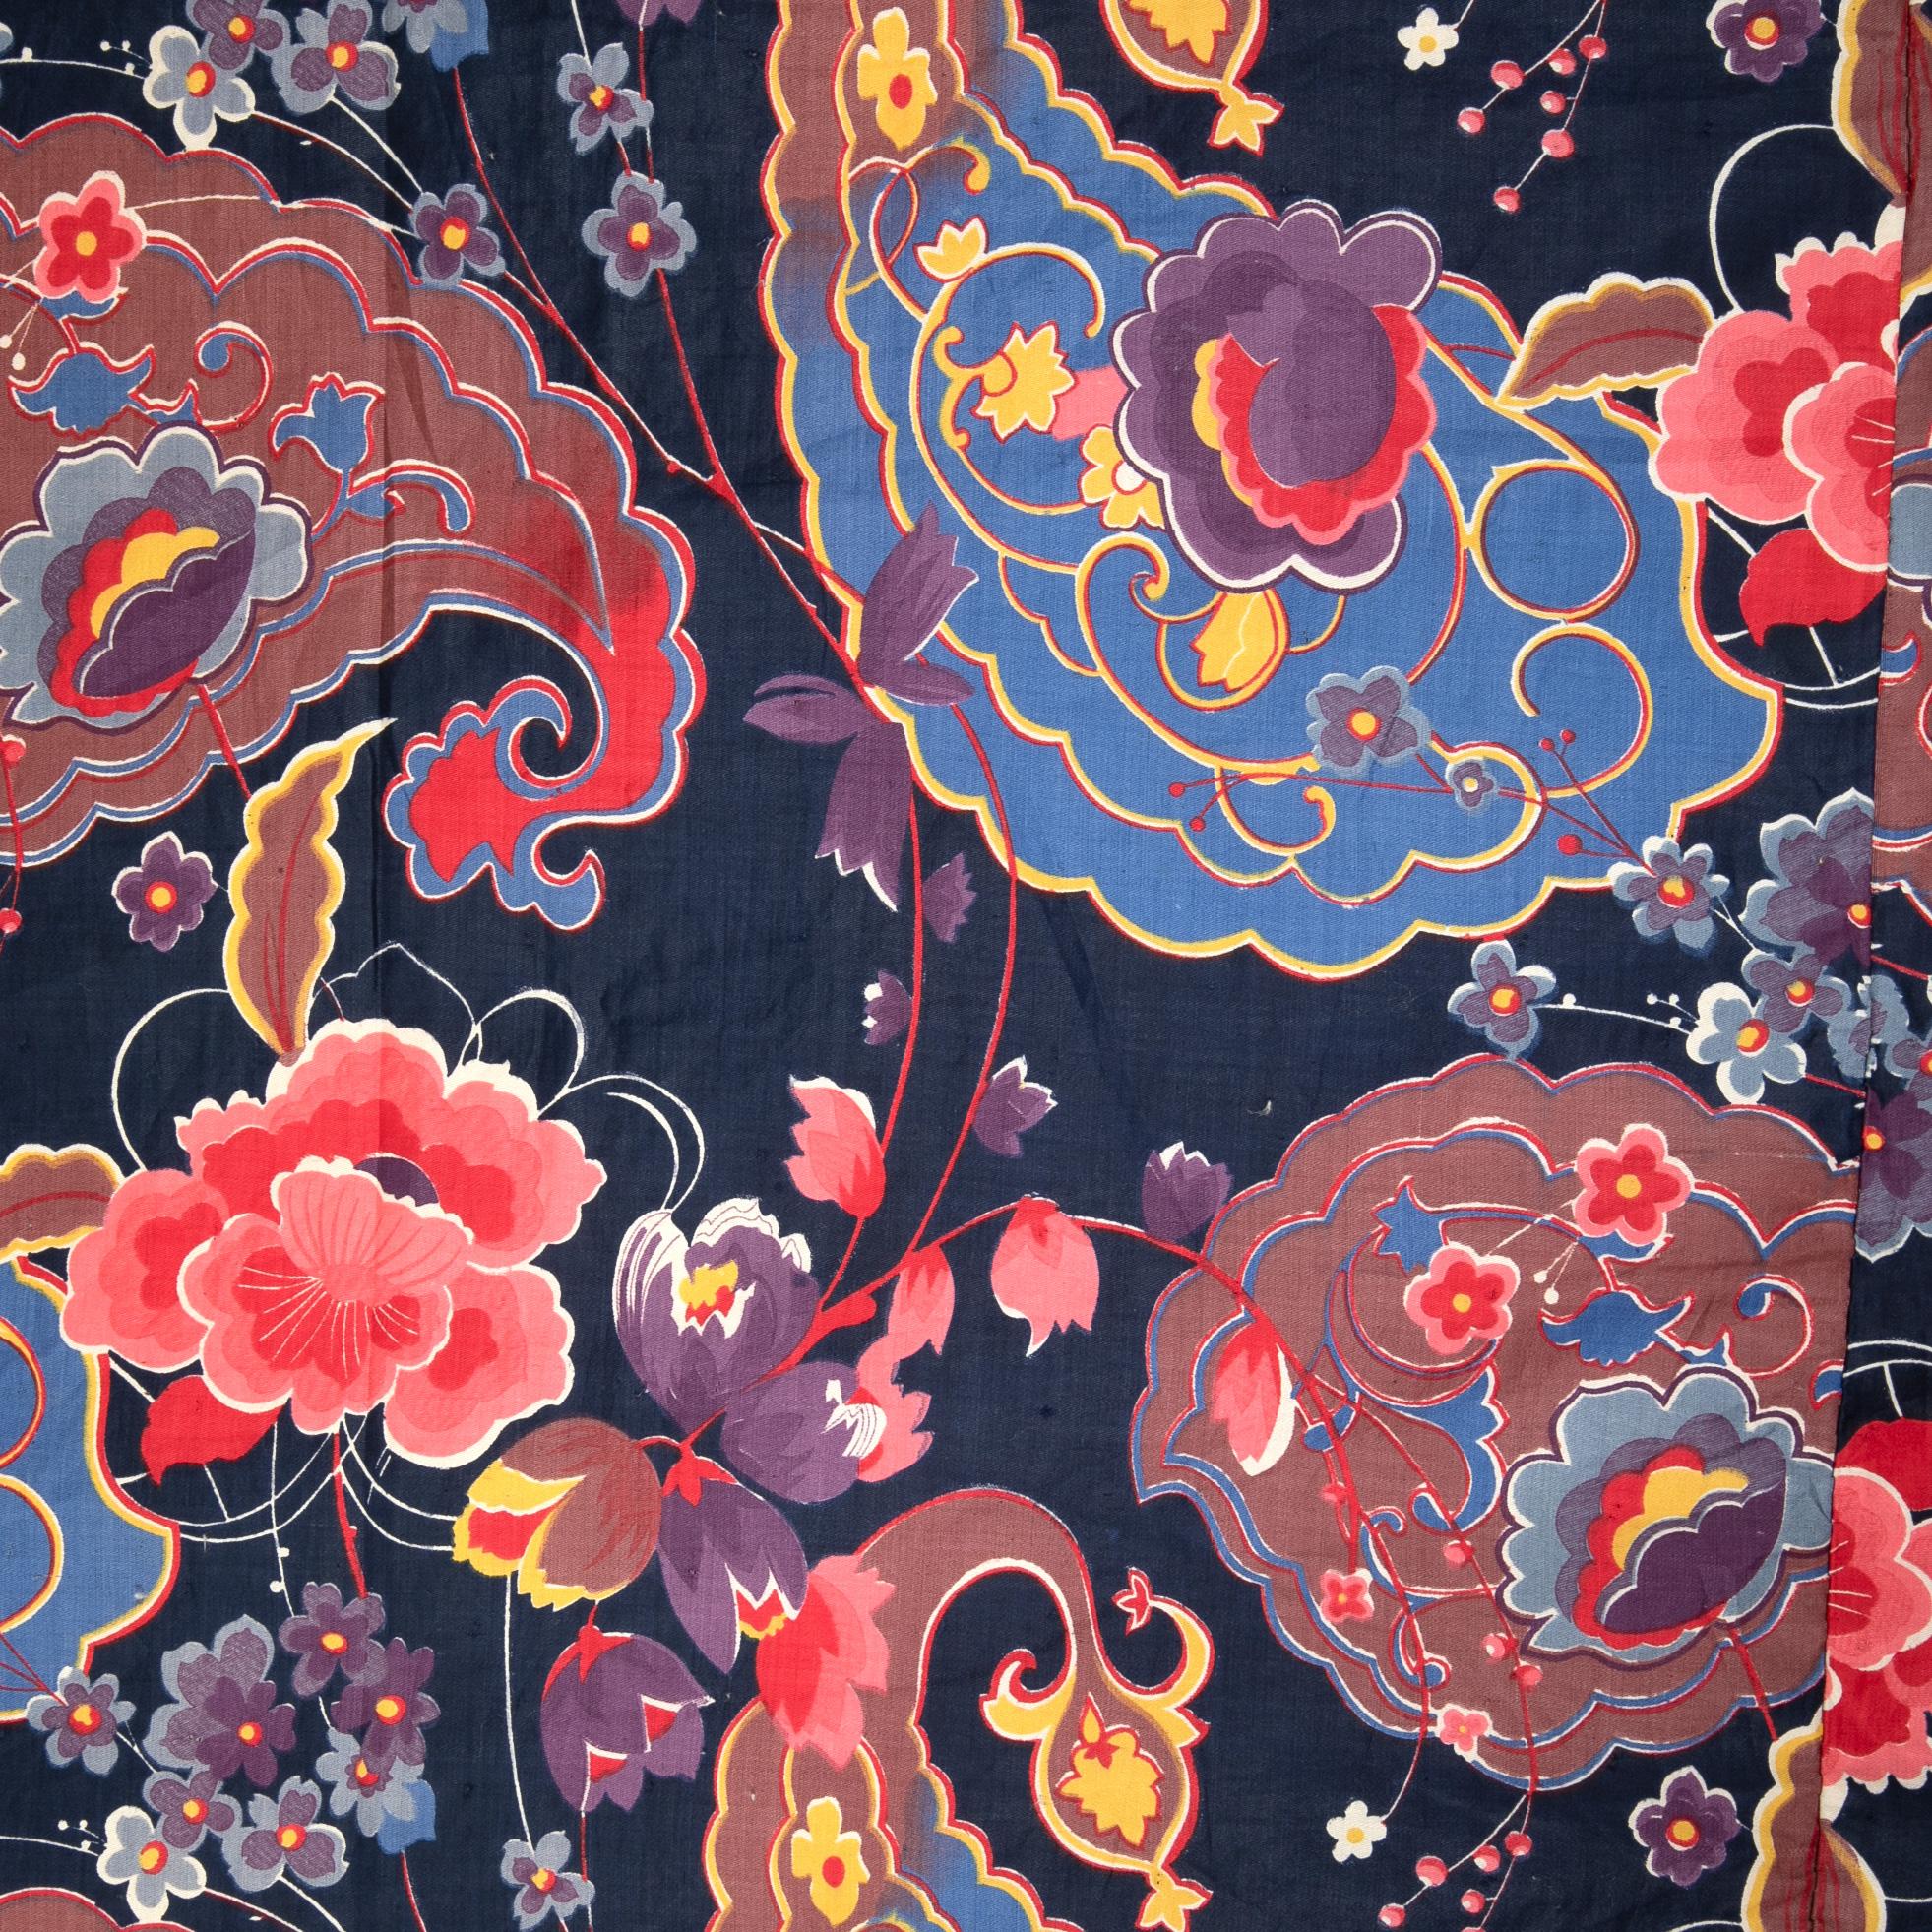 Mid-Century Modern Russian Printed Cotton Fabric Panel, First Half of the 20th Century